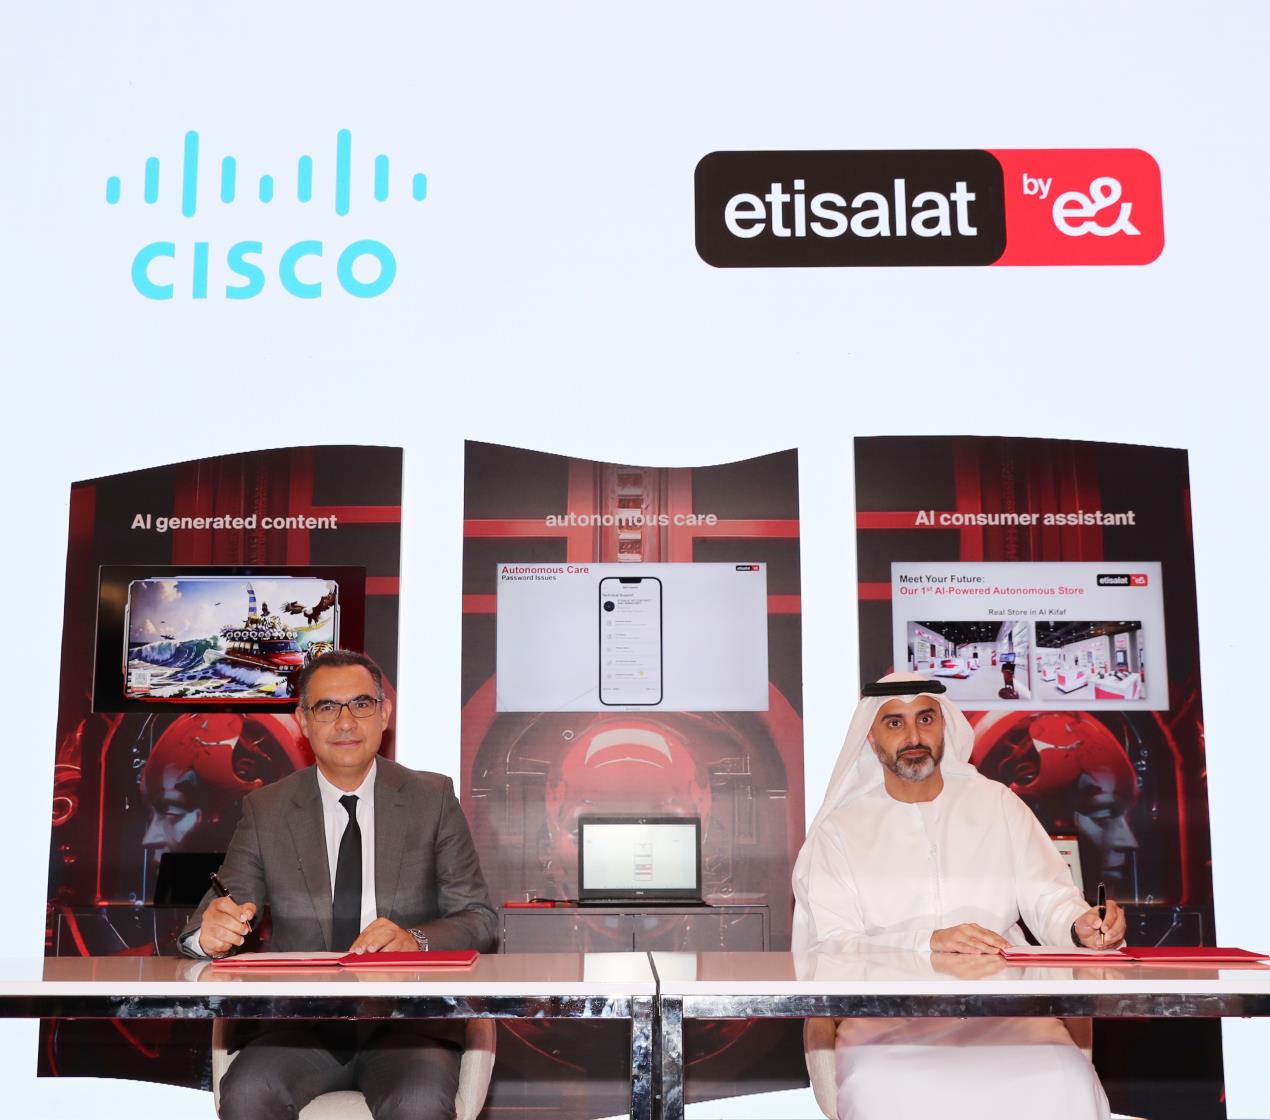 etisalat by e& introduces tailored solutions to aid startups and micro  businesses - Edge Middle East